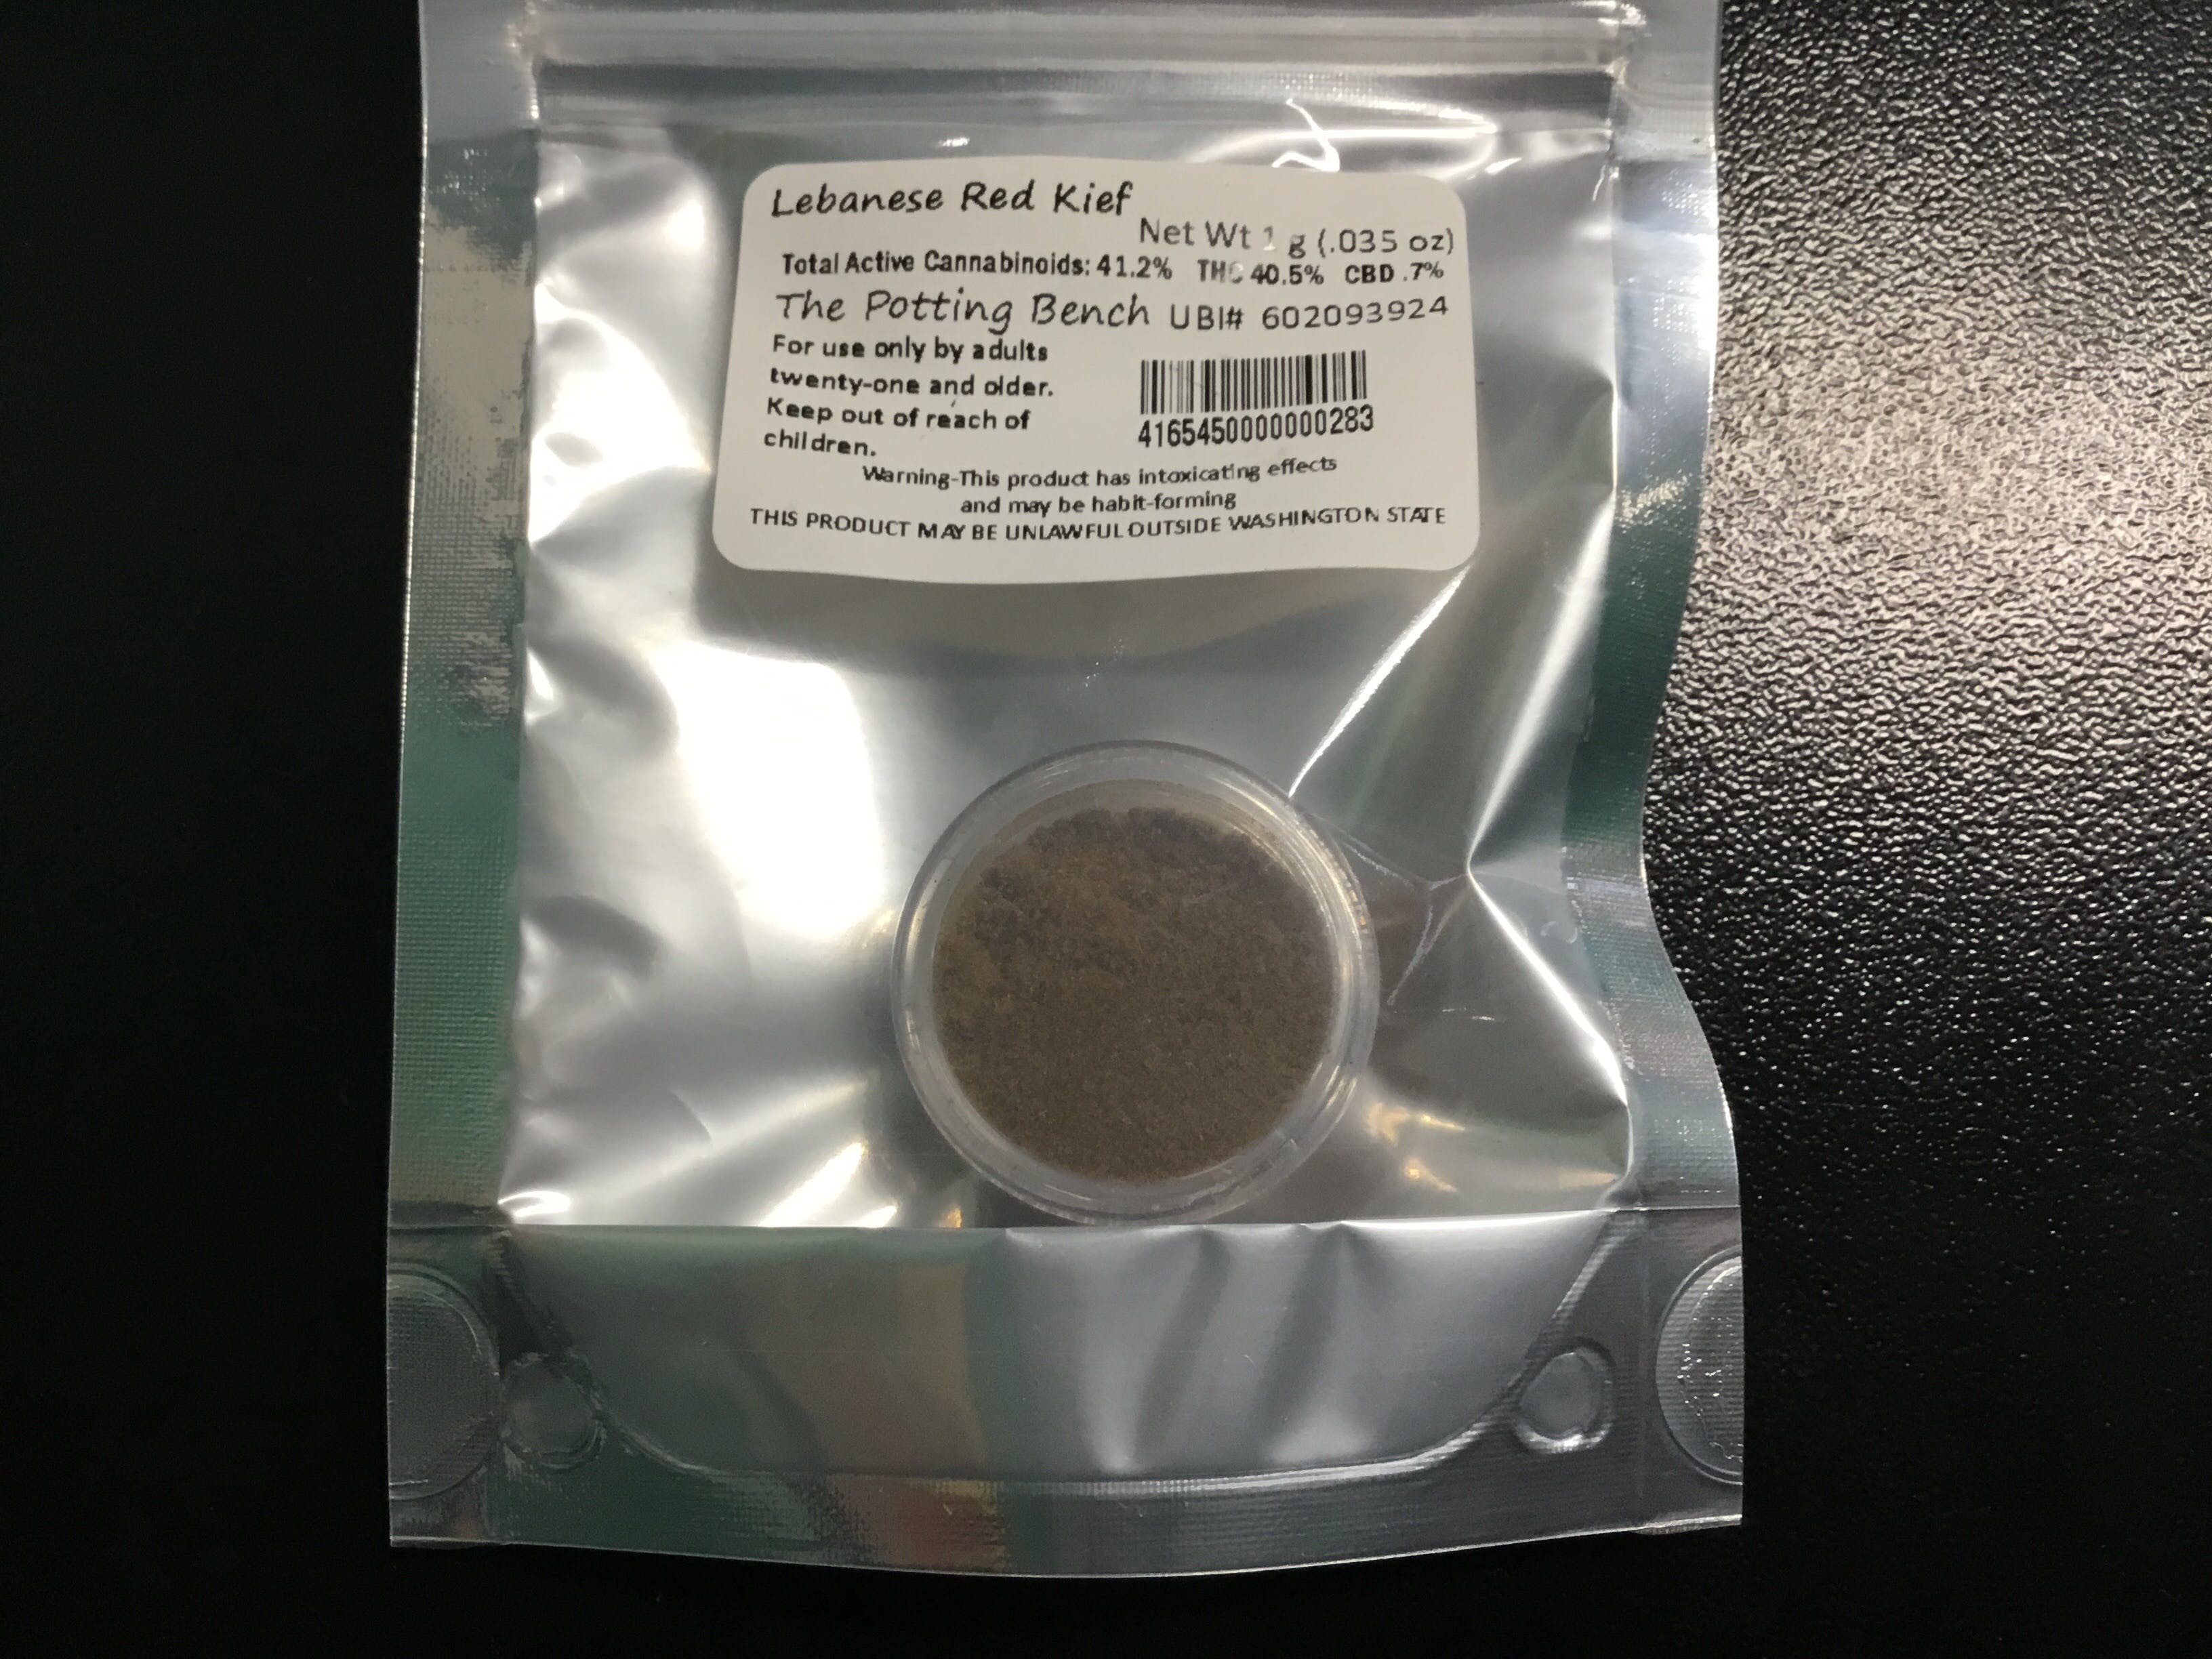 concentrate-tpb-lebanesered-kief-1g